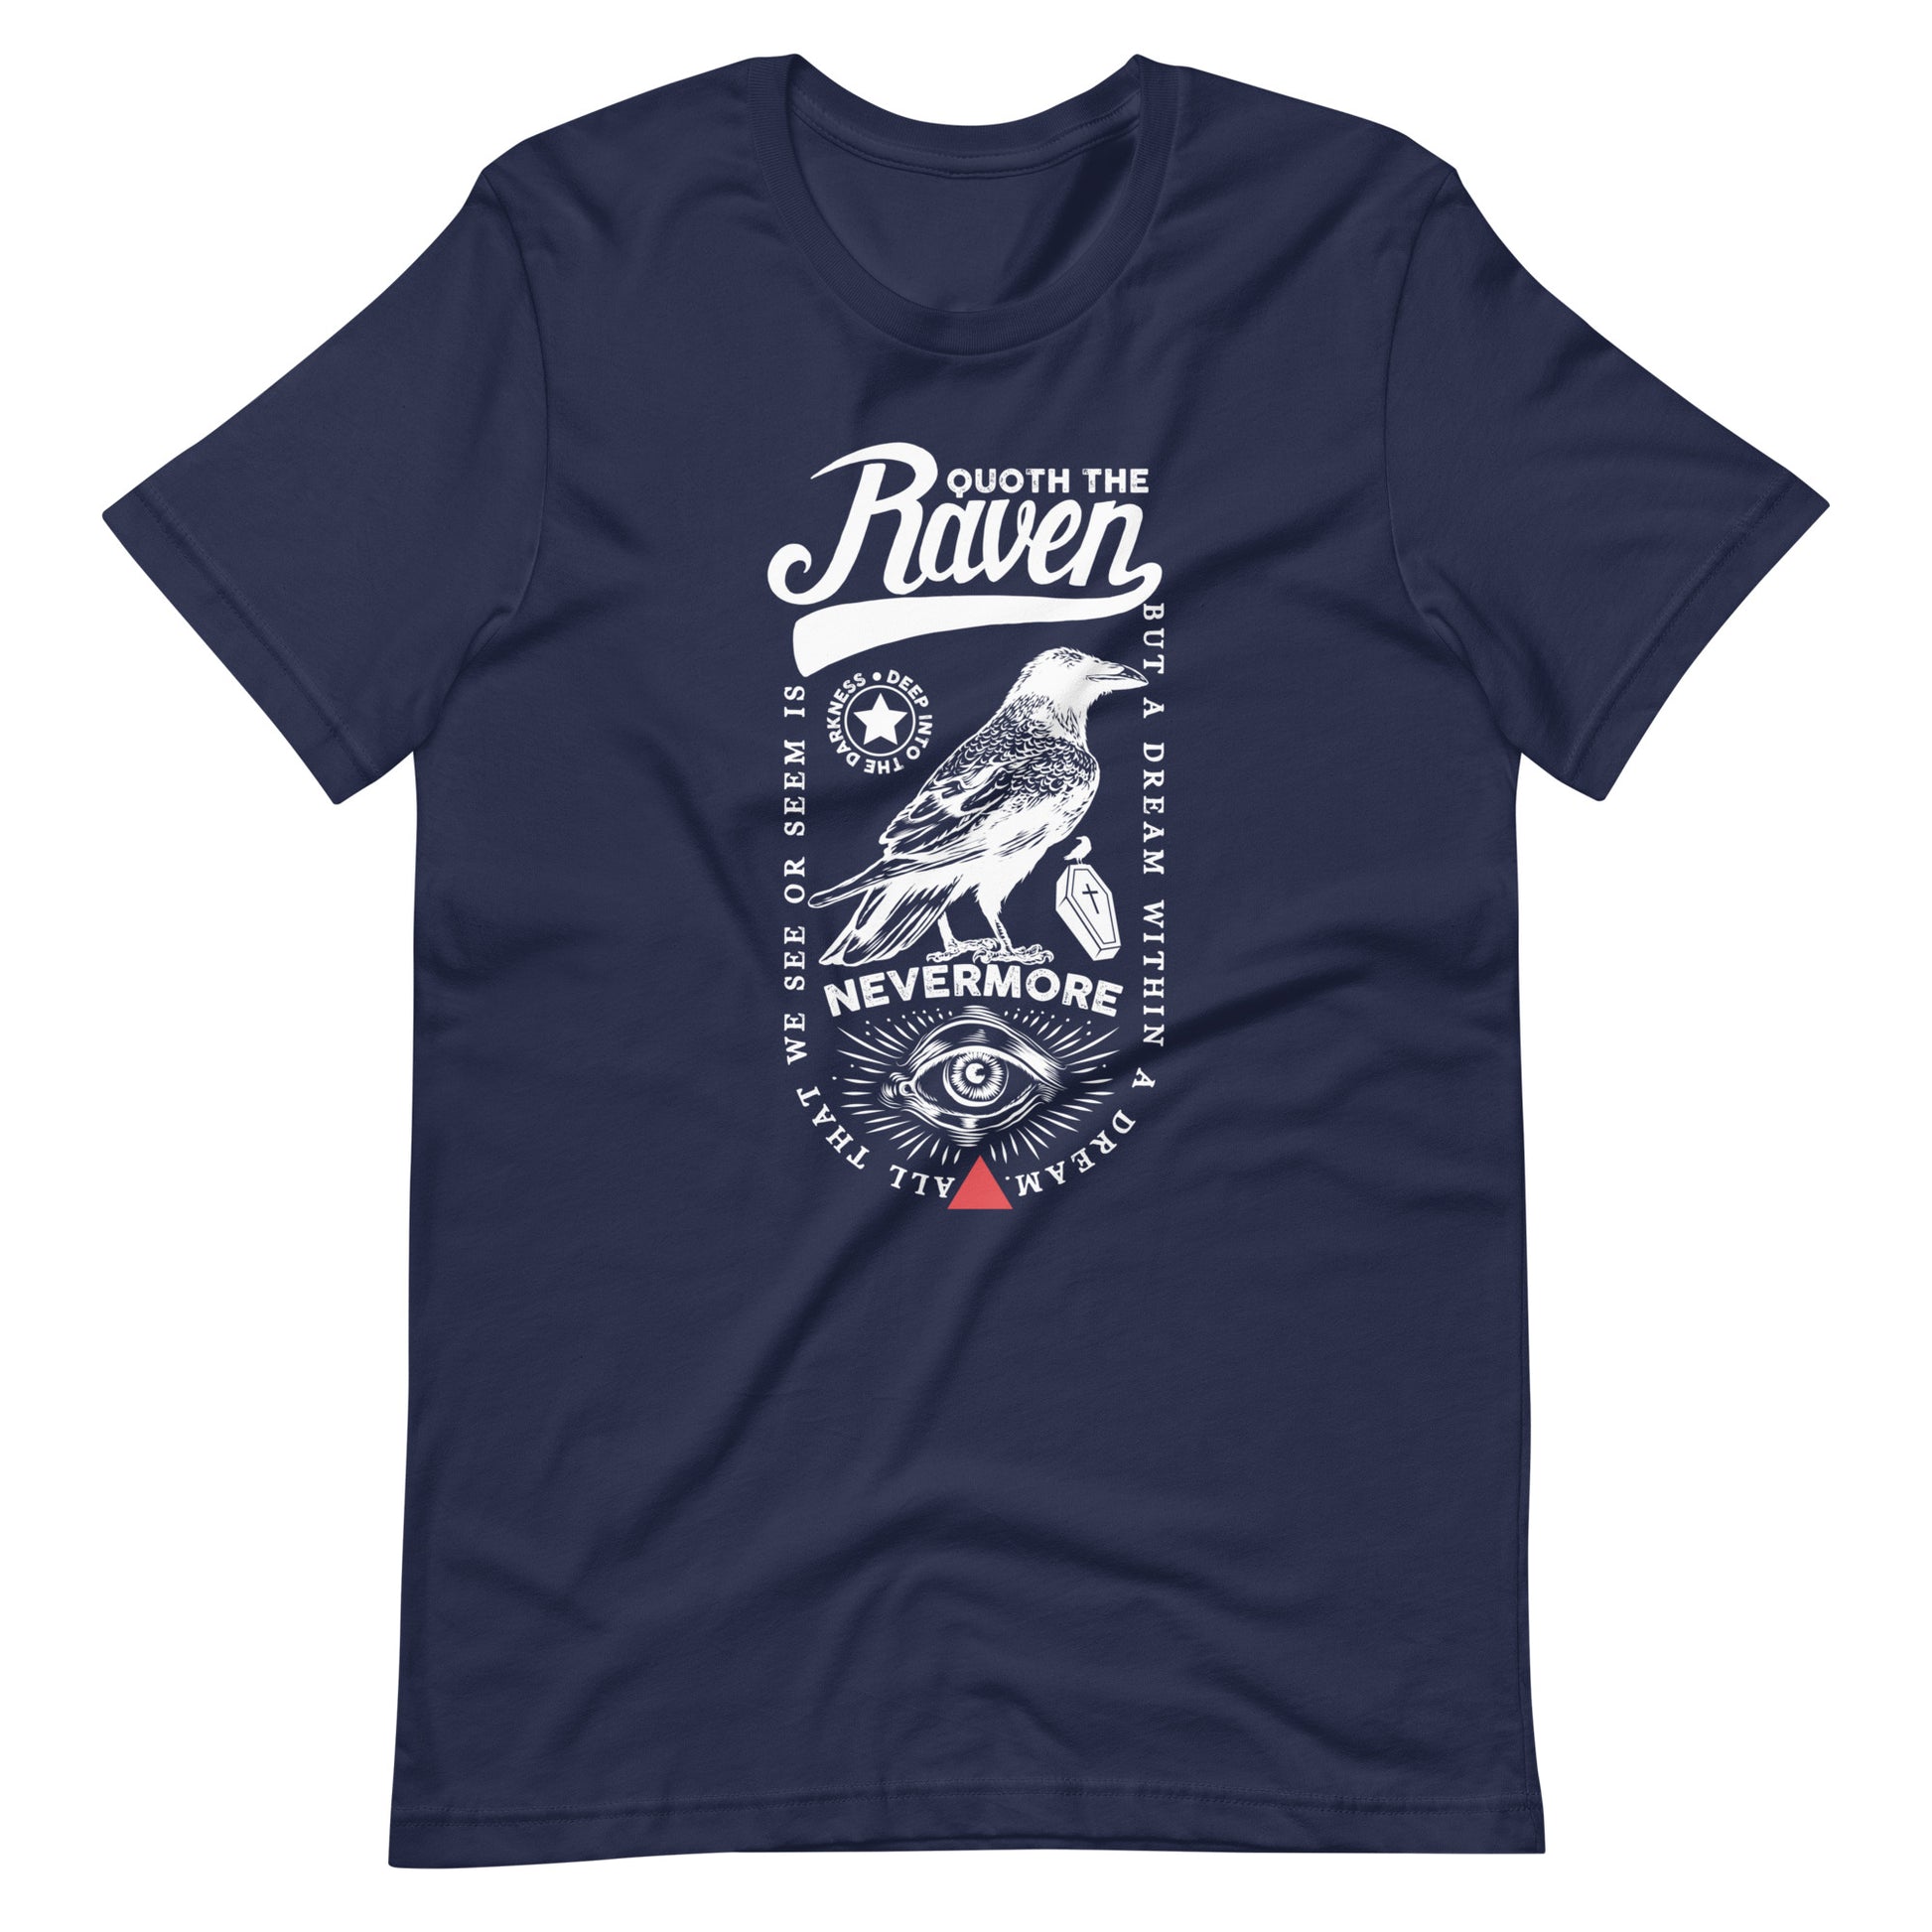 Quoth the Raven Nevermore Loaded - Men's t-shirt - Navy Front